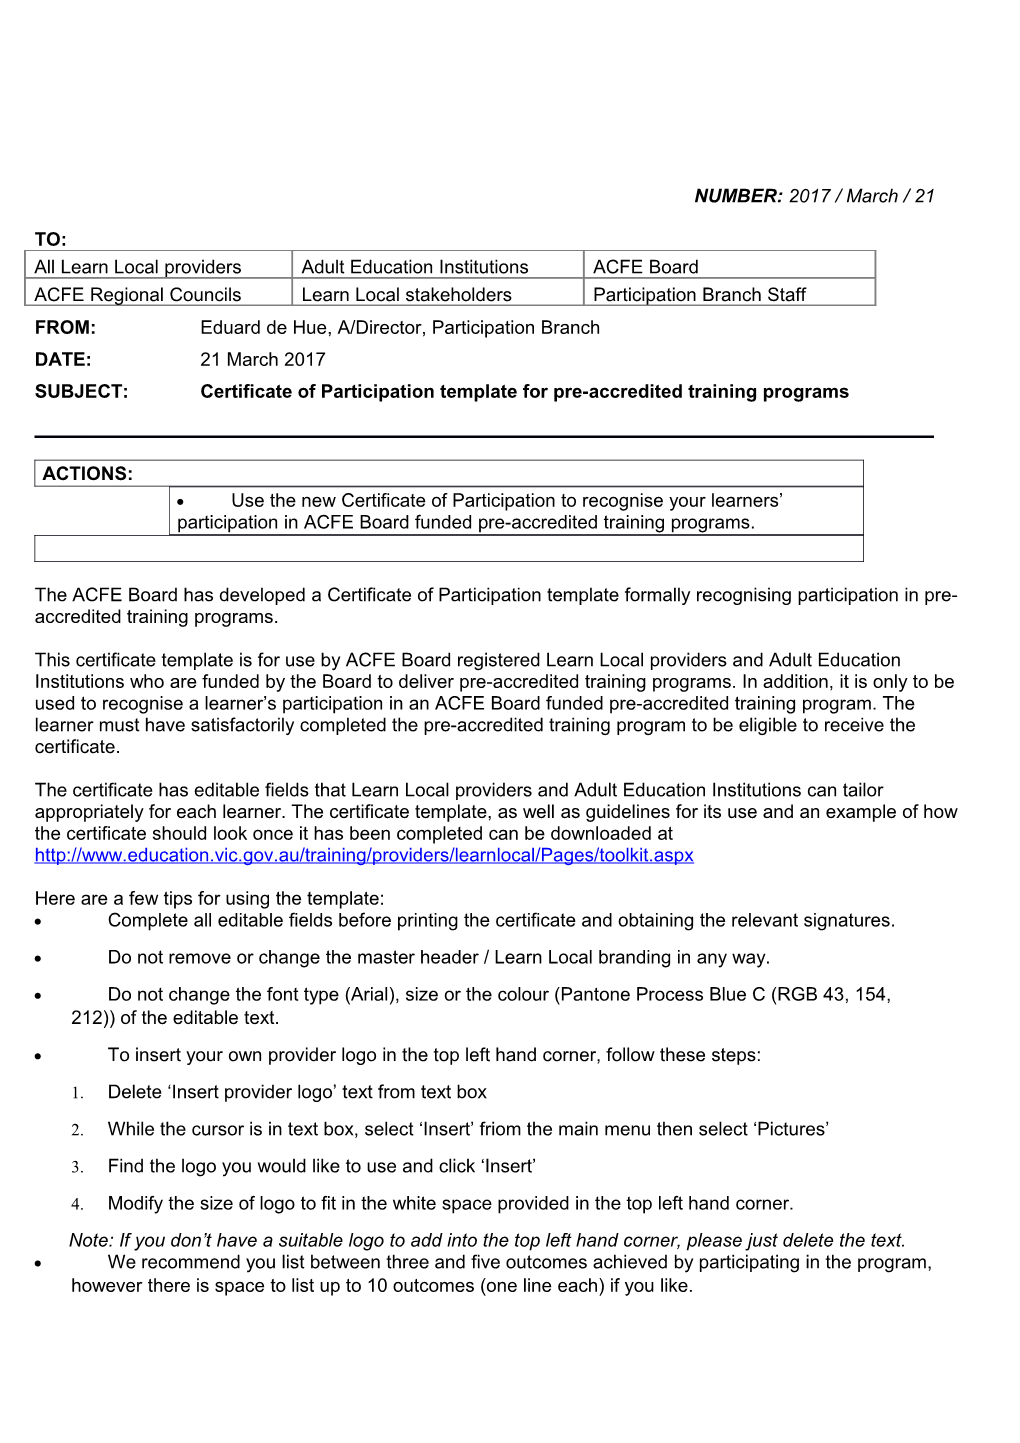 SUBJECT: Certificate of Participation Template for Pre-Accredited Training Programs